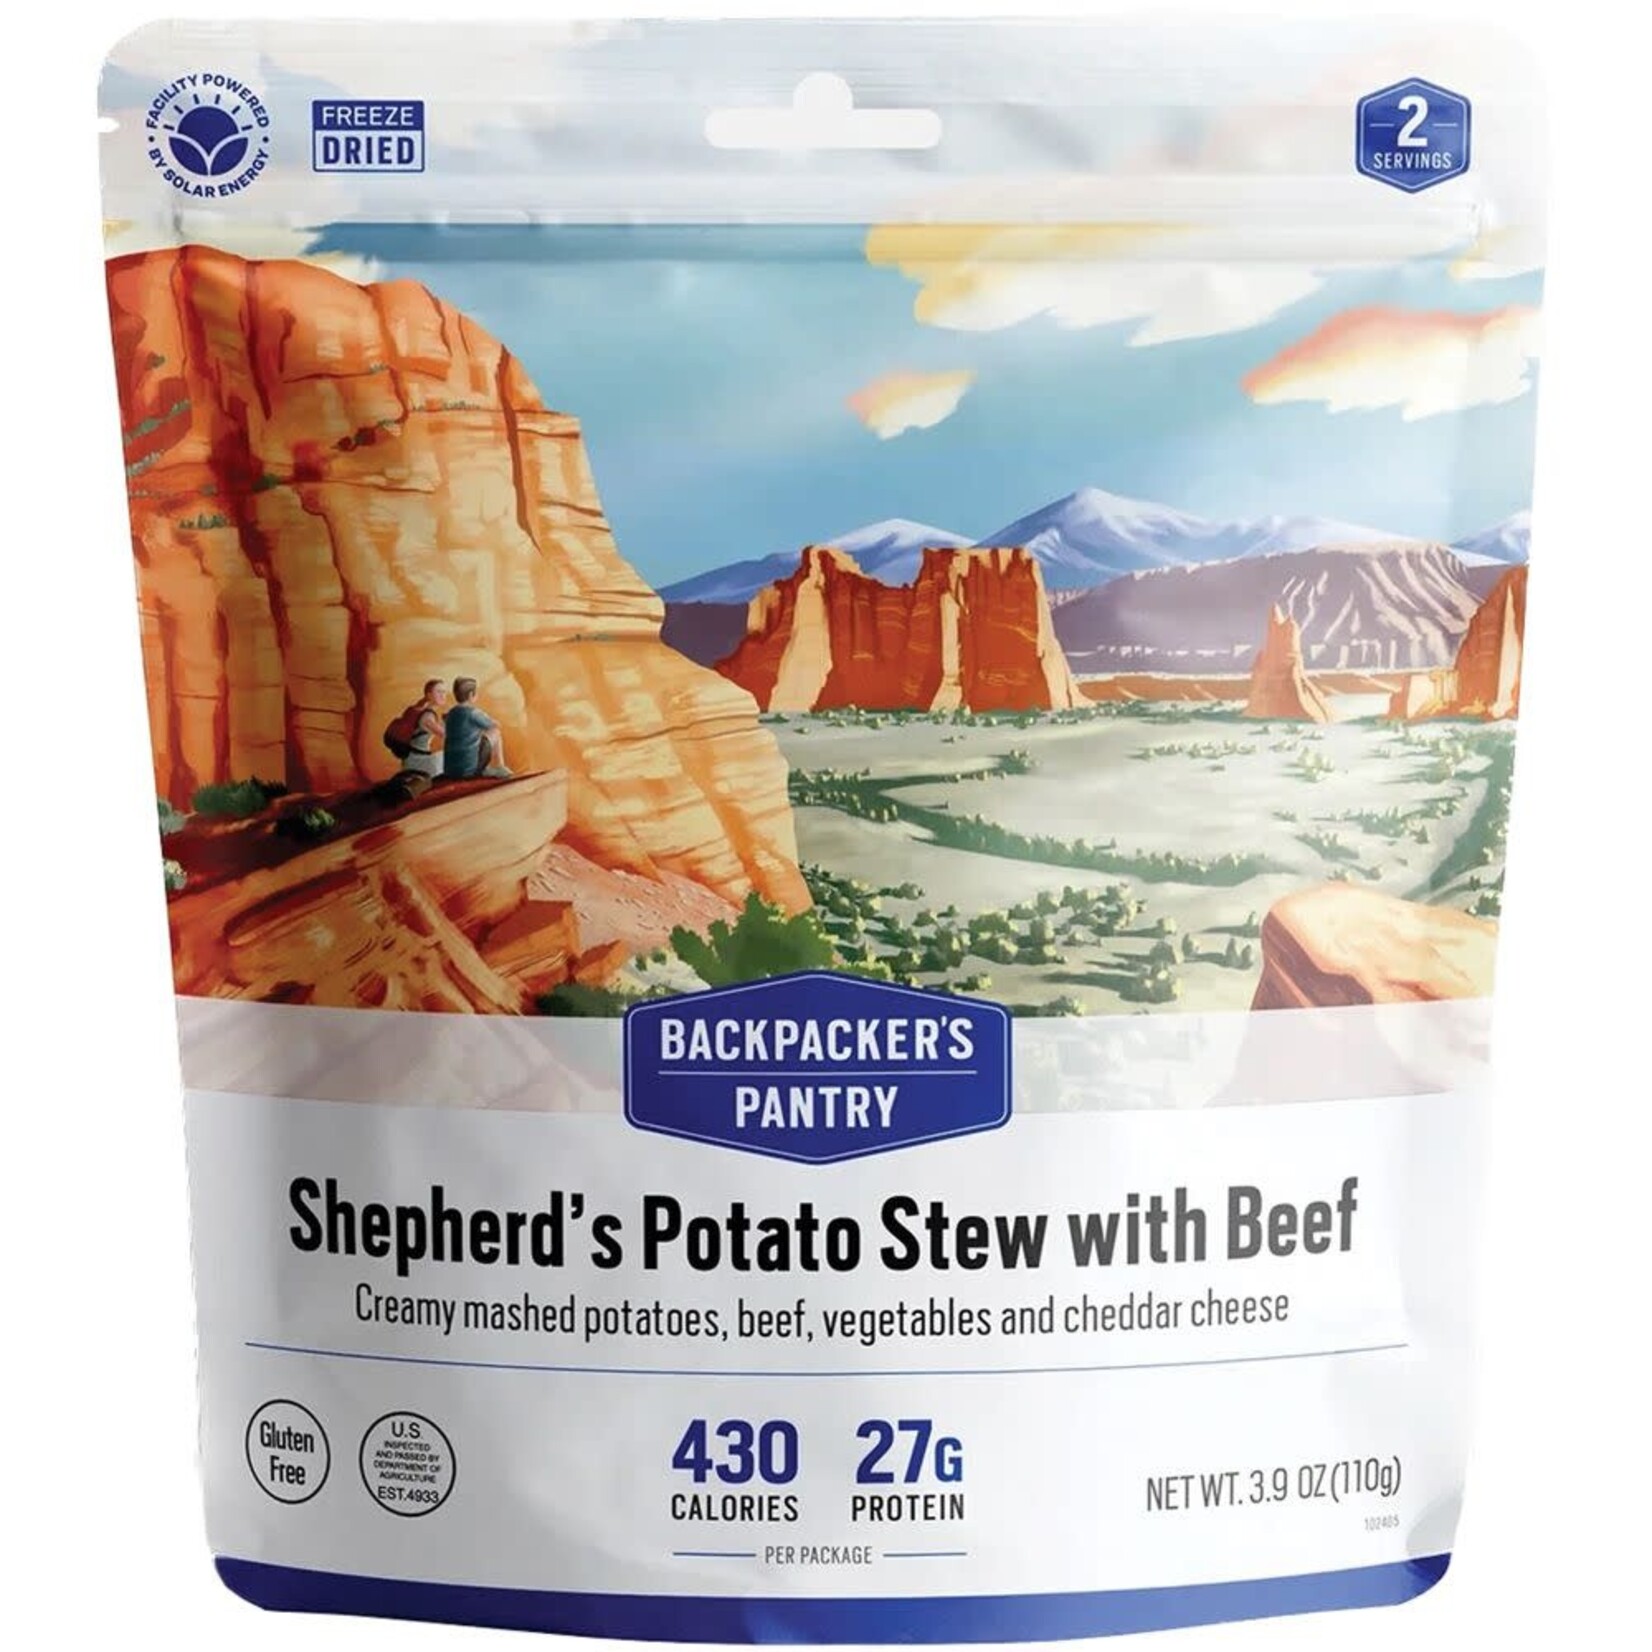 Backpacker's Pantry Backpacker's Pantry Shepherd's Potato Stew with Beef